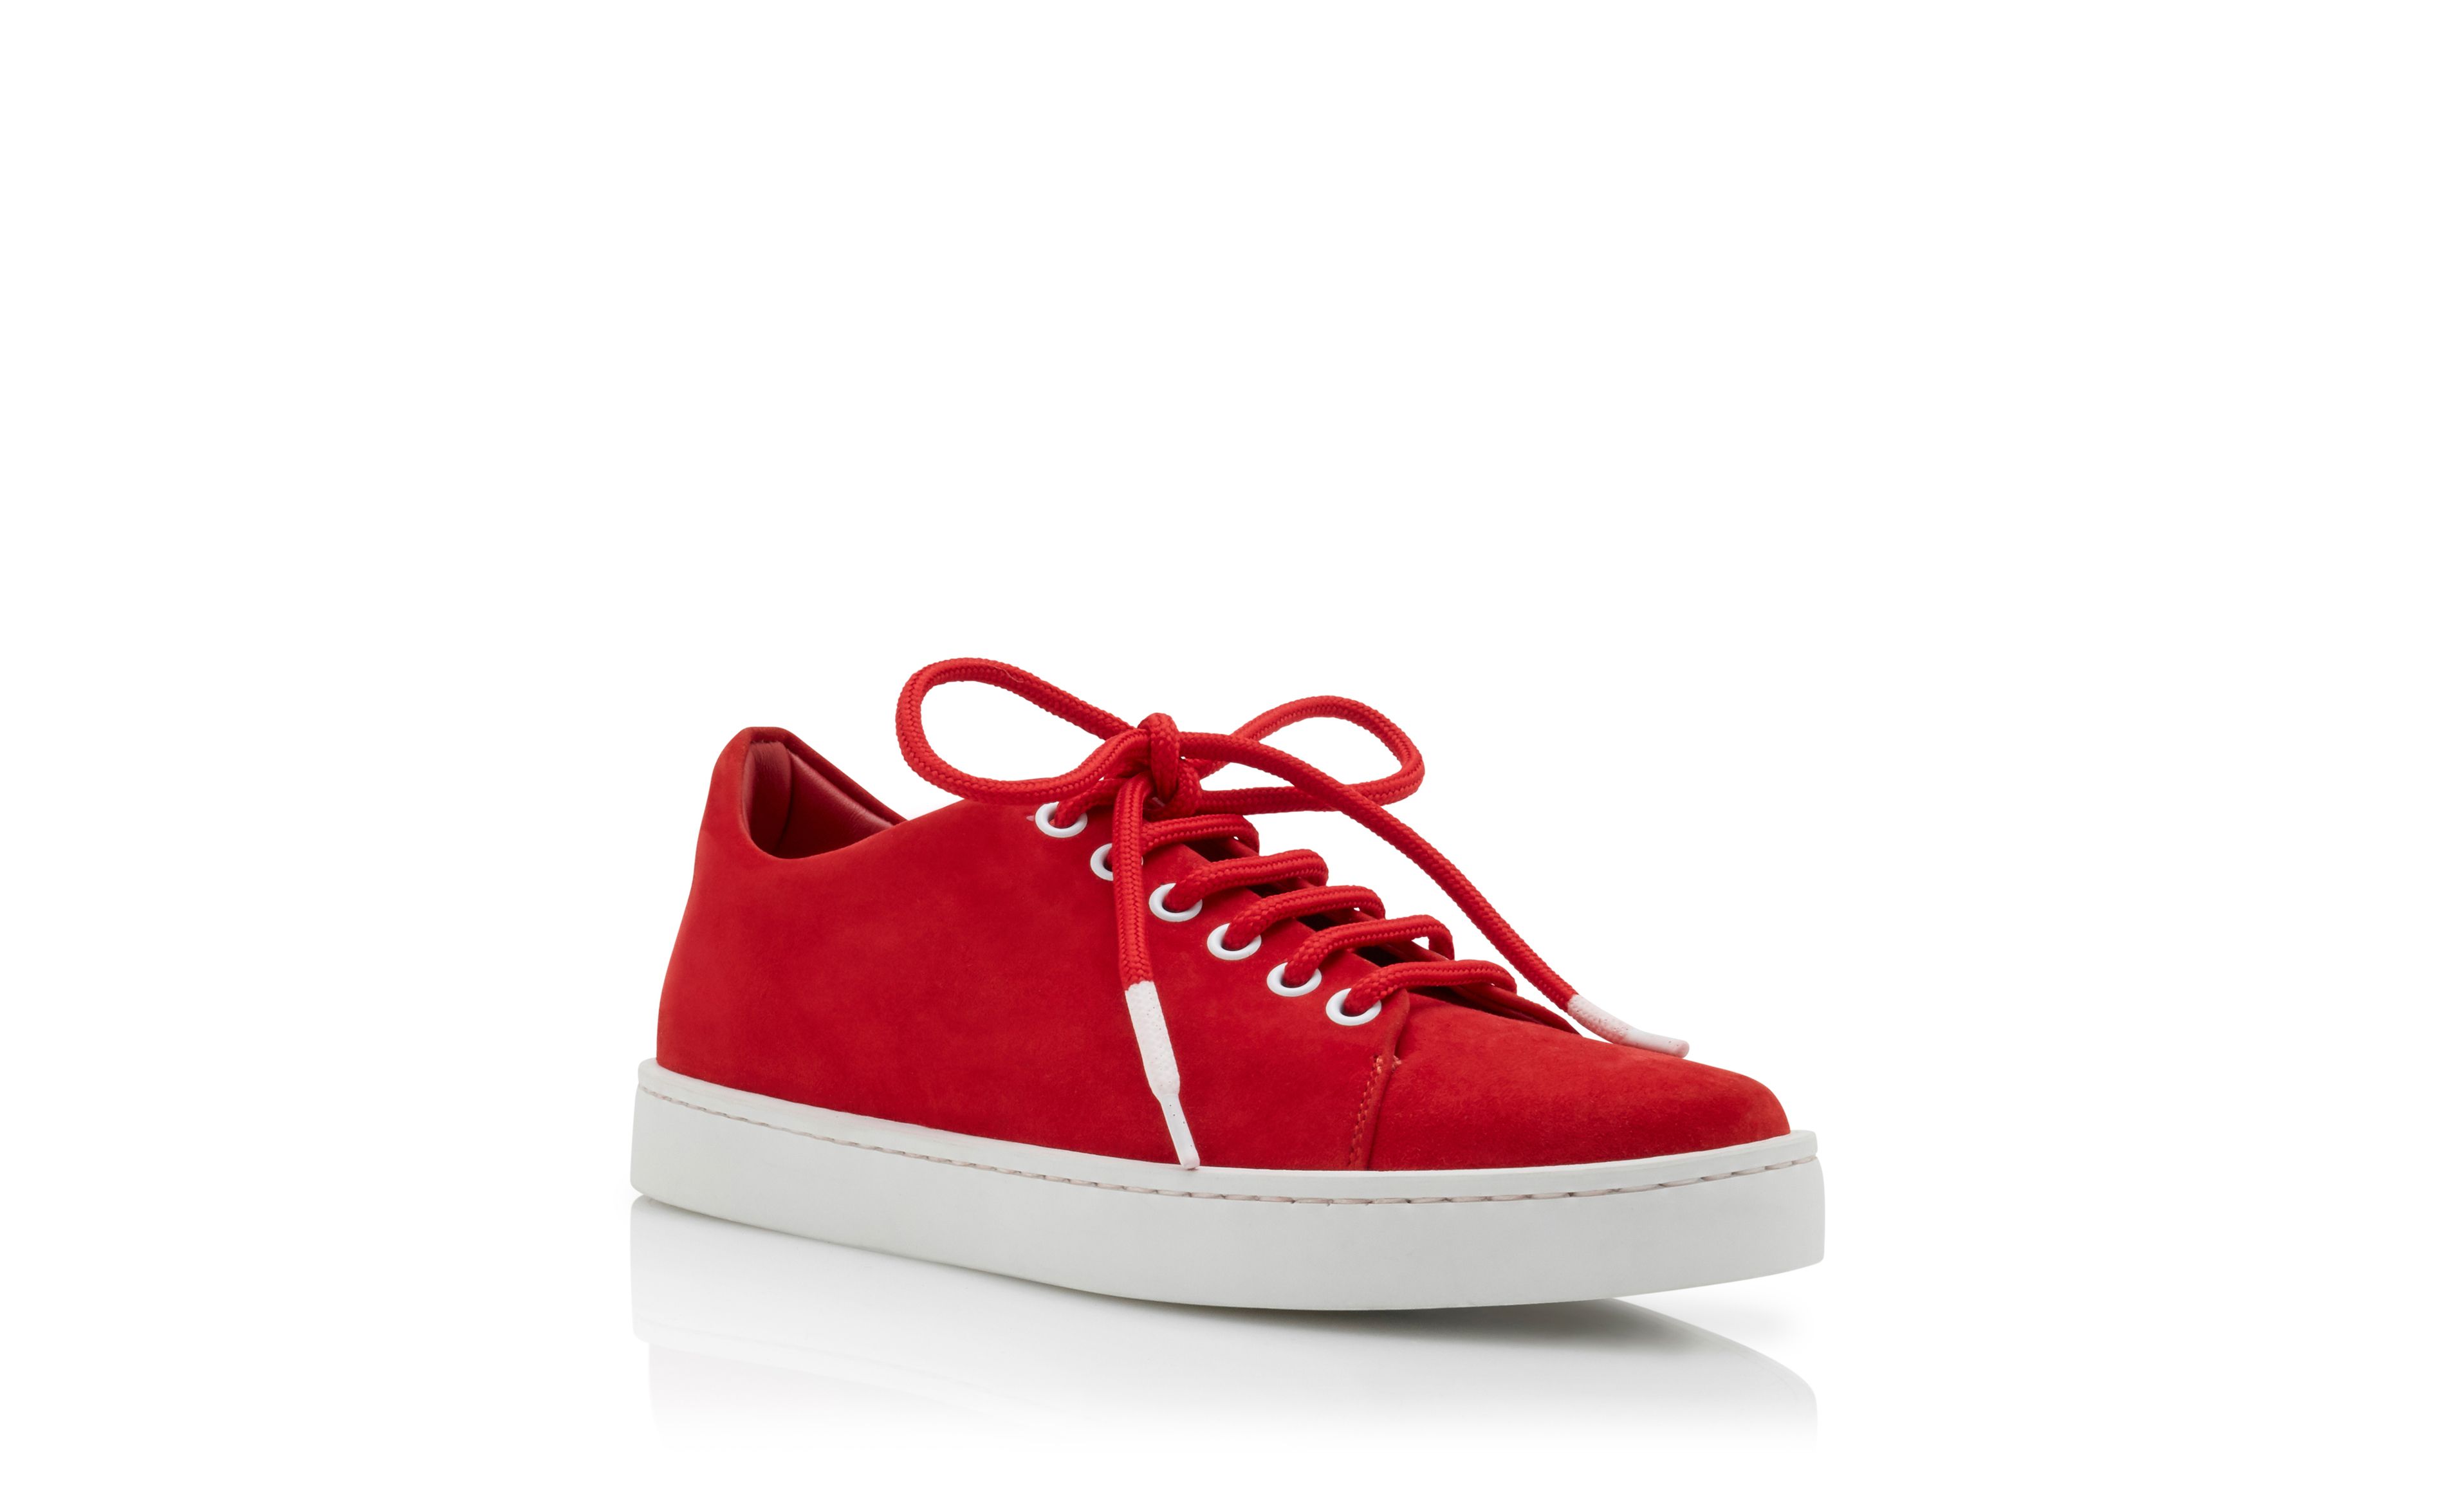 Designer Bright Red Suede Low Cut Sneakers - Image Upsell